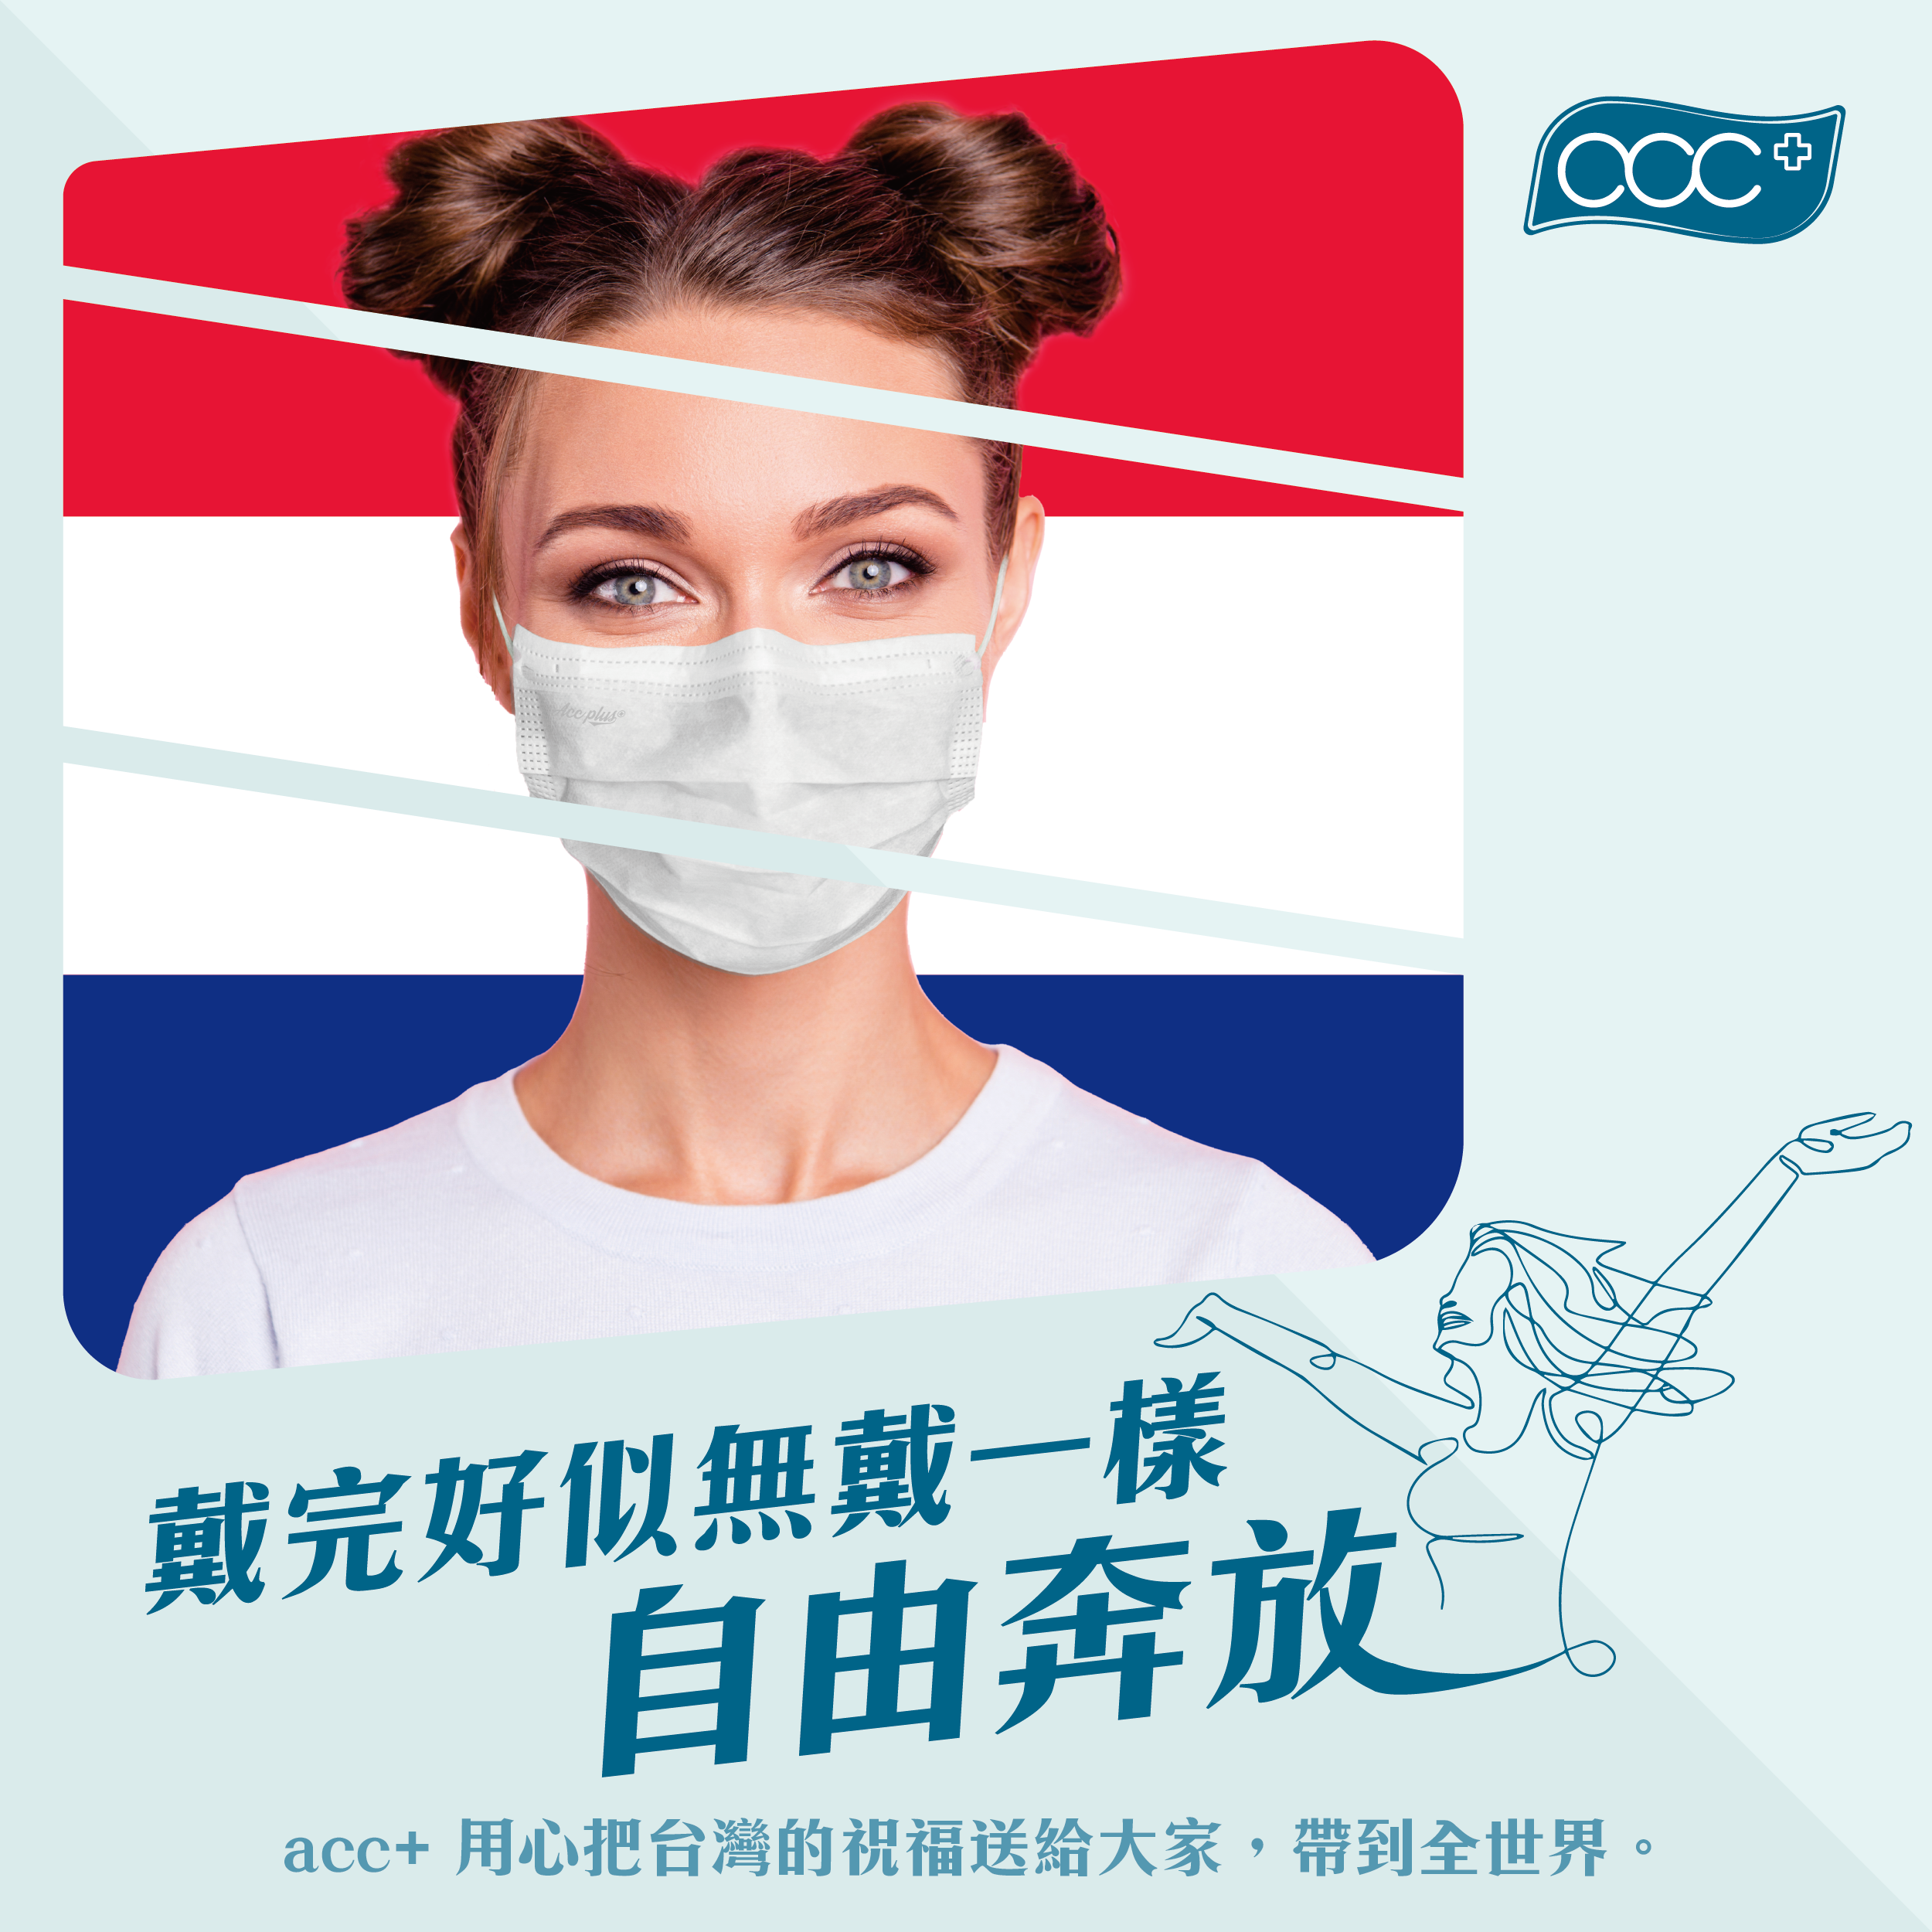 acc+ Taiwan French adult mask ASTM Level 3 Intertek report proves long-acting antibacterial